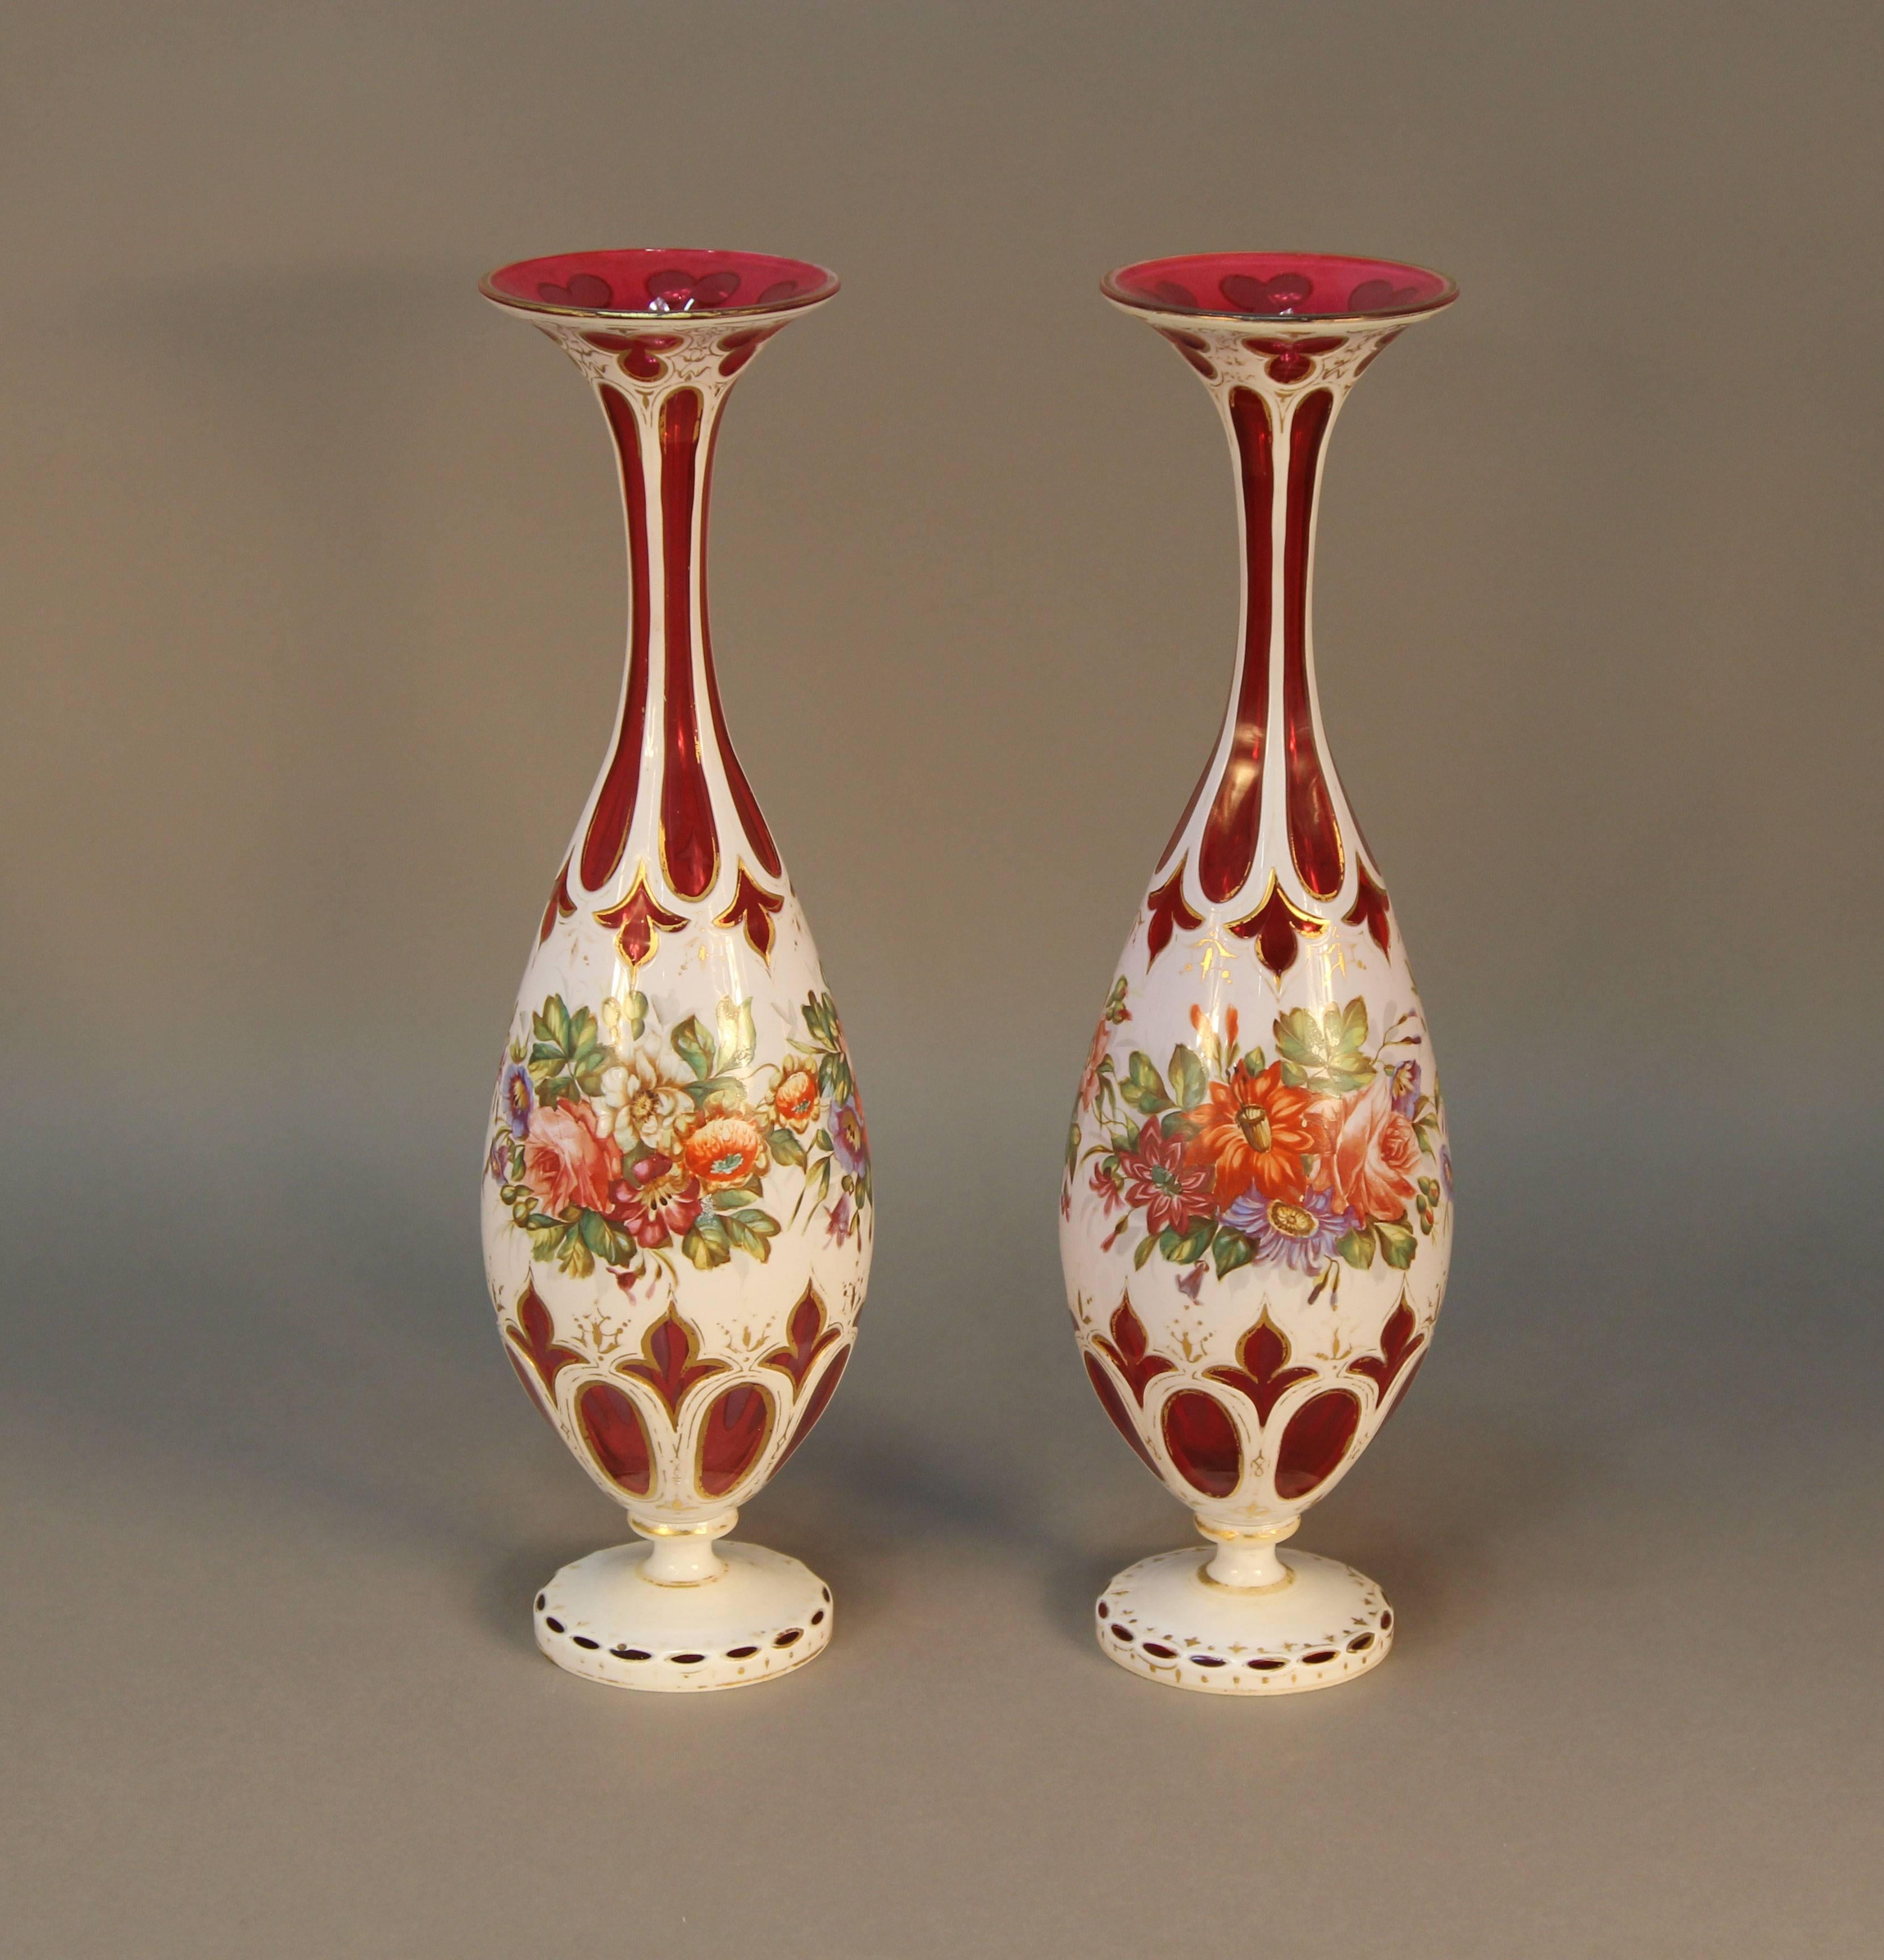 A rare pair of museum quality ruby overlay vases with hand-painted enamel floral decoration.